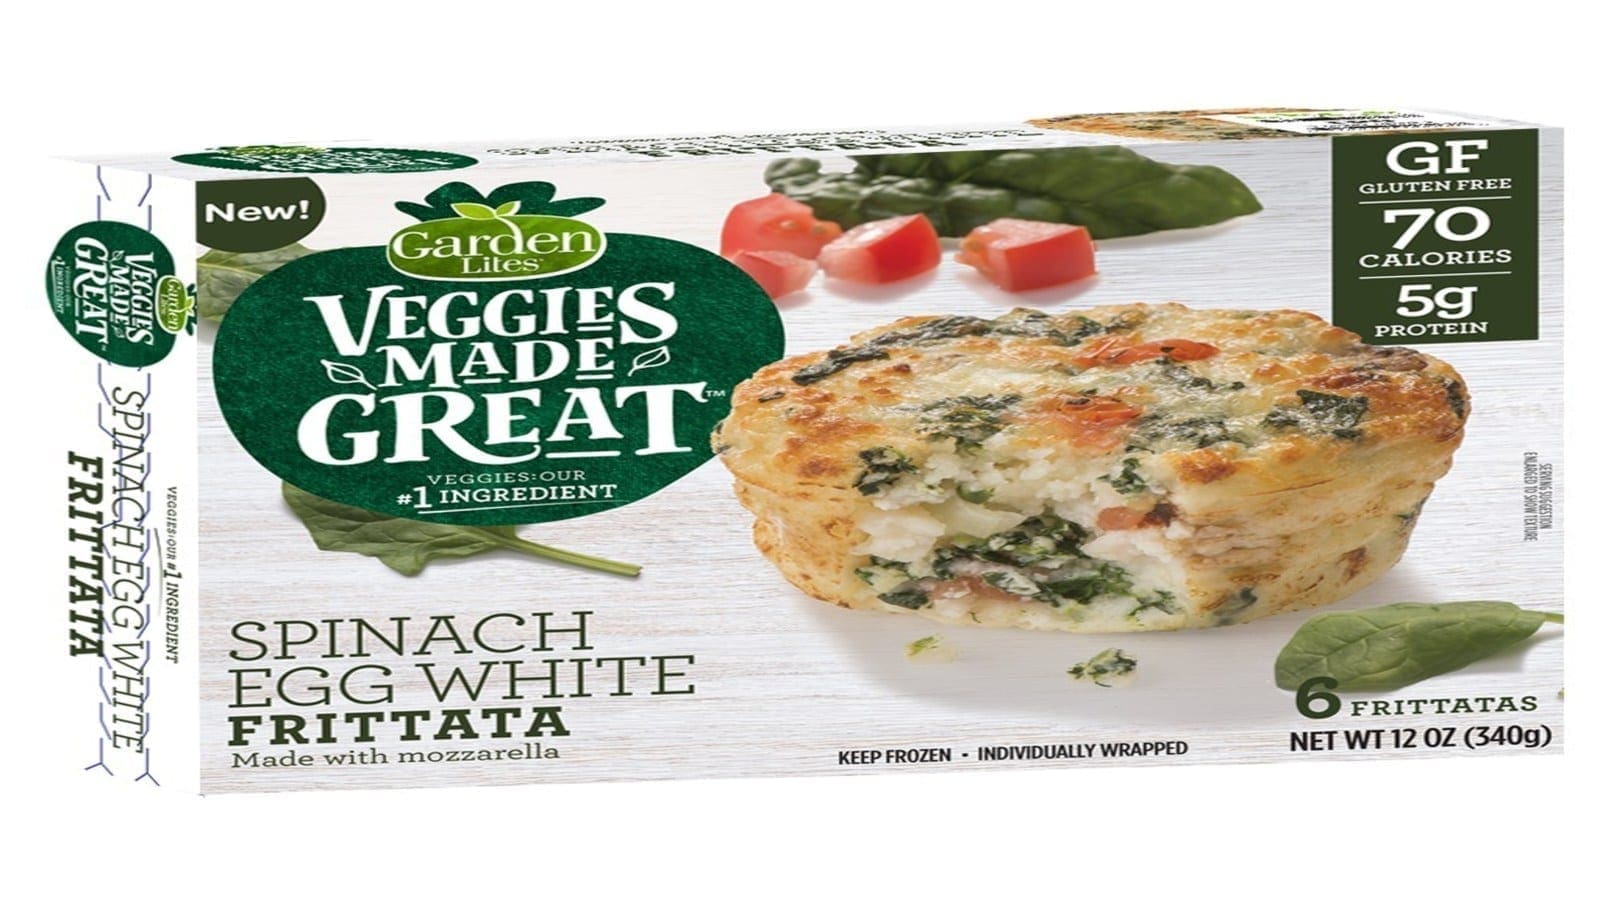 Veggies Made Great brand releases new line of frittatas produced by Beyond Meat